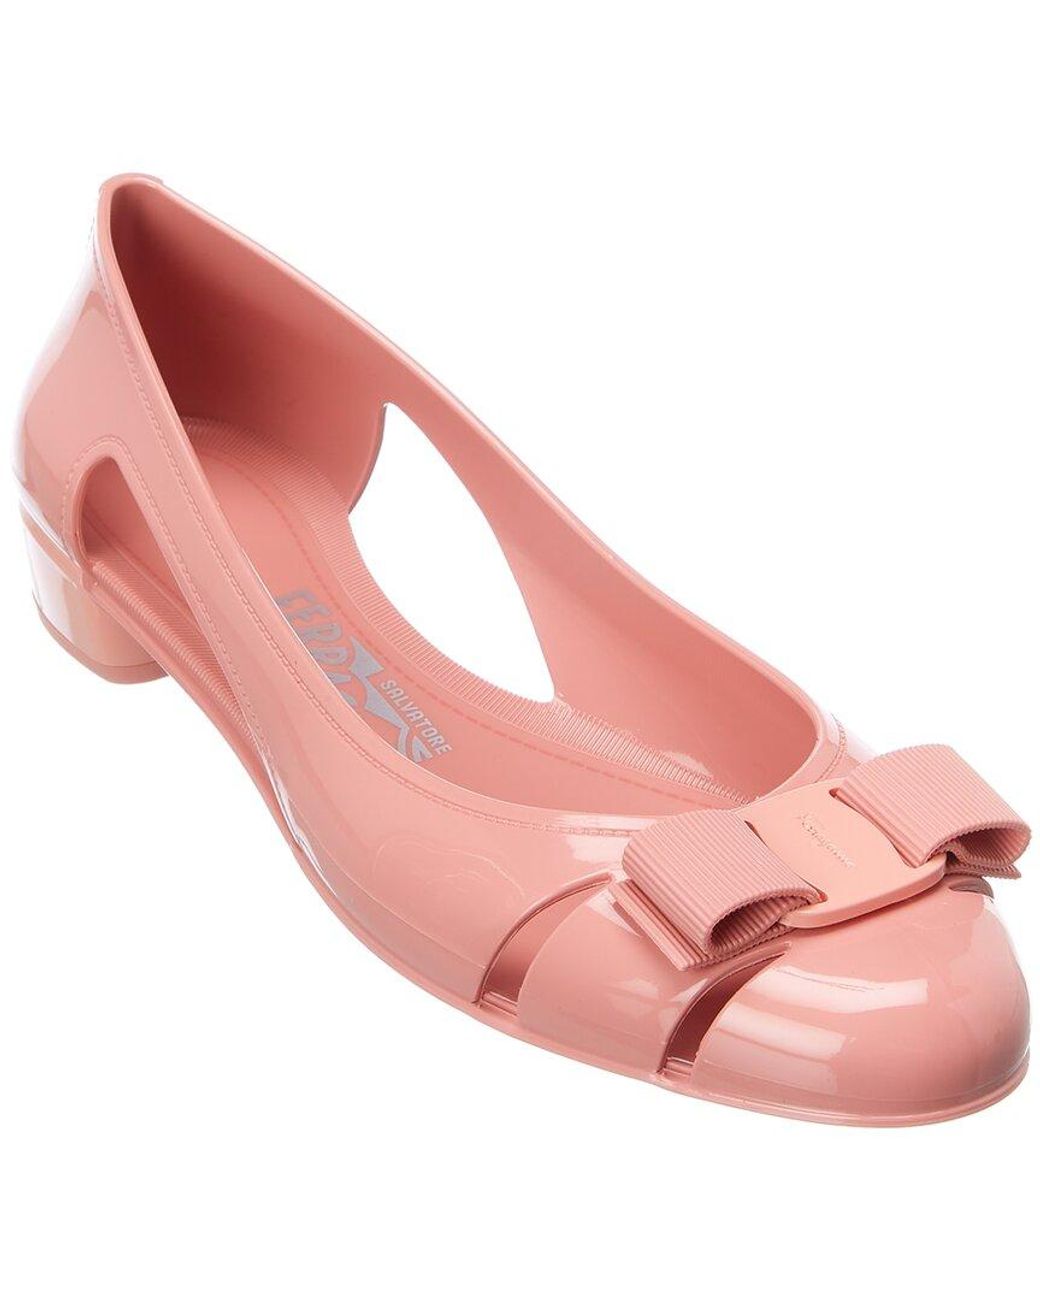 Ferragamo Rubber Vara Bow Jelly Ballet Flat in Pink - Save 28% | Lyst